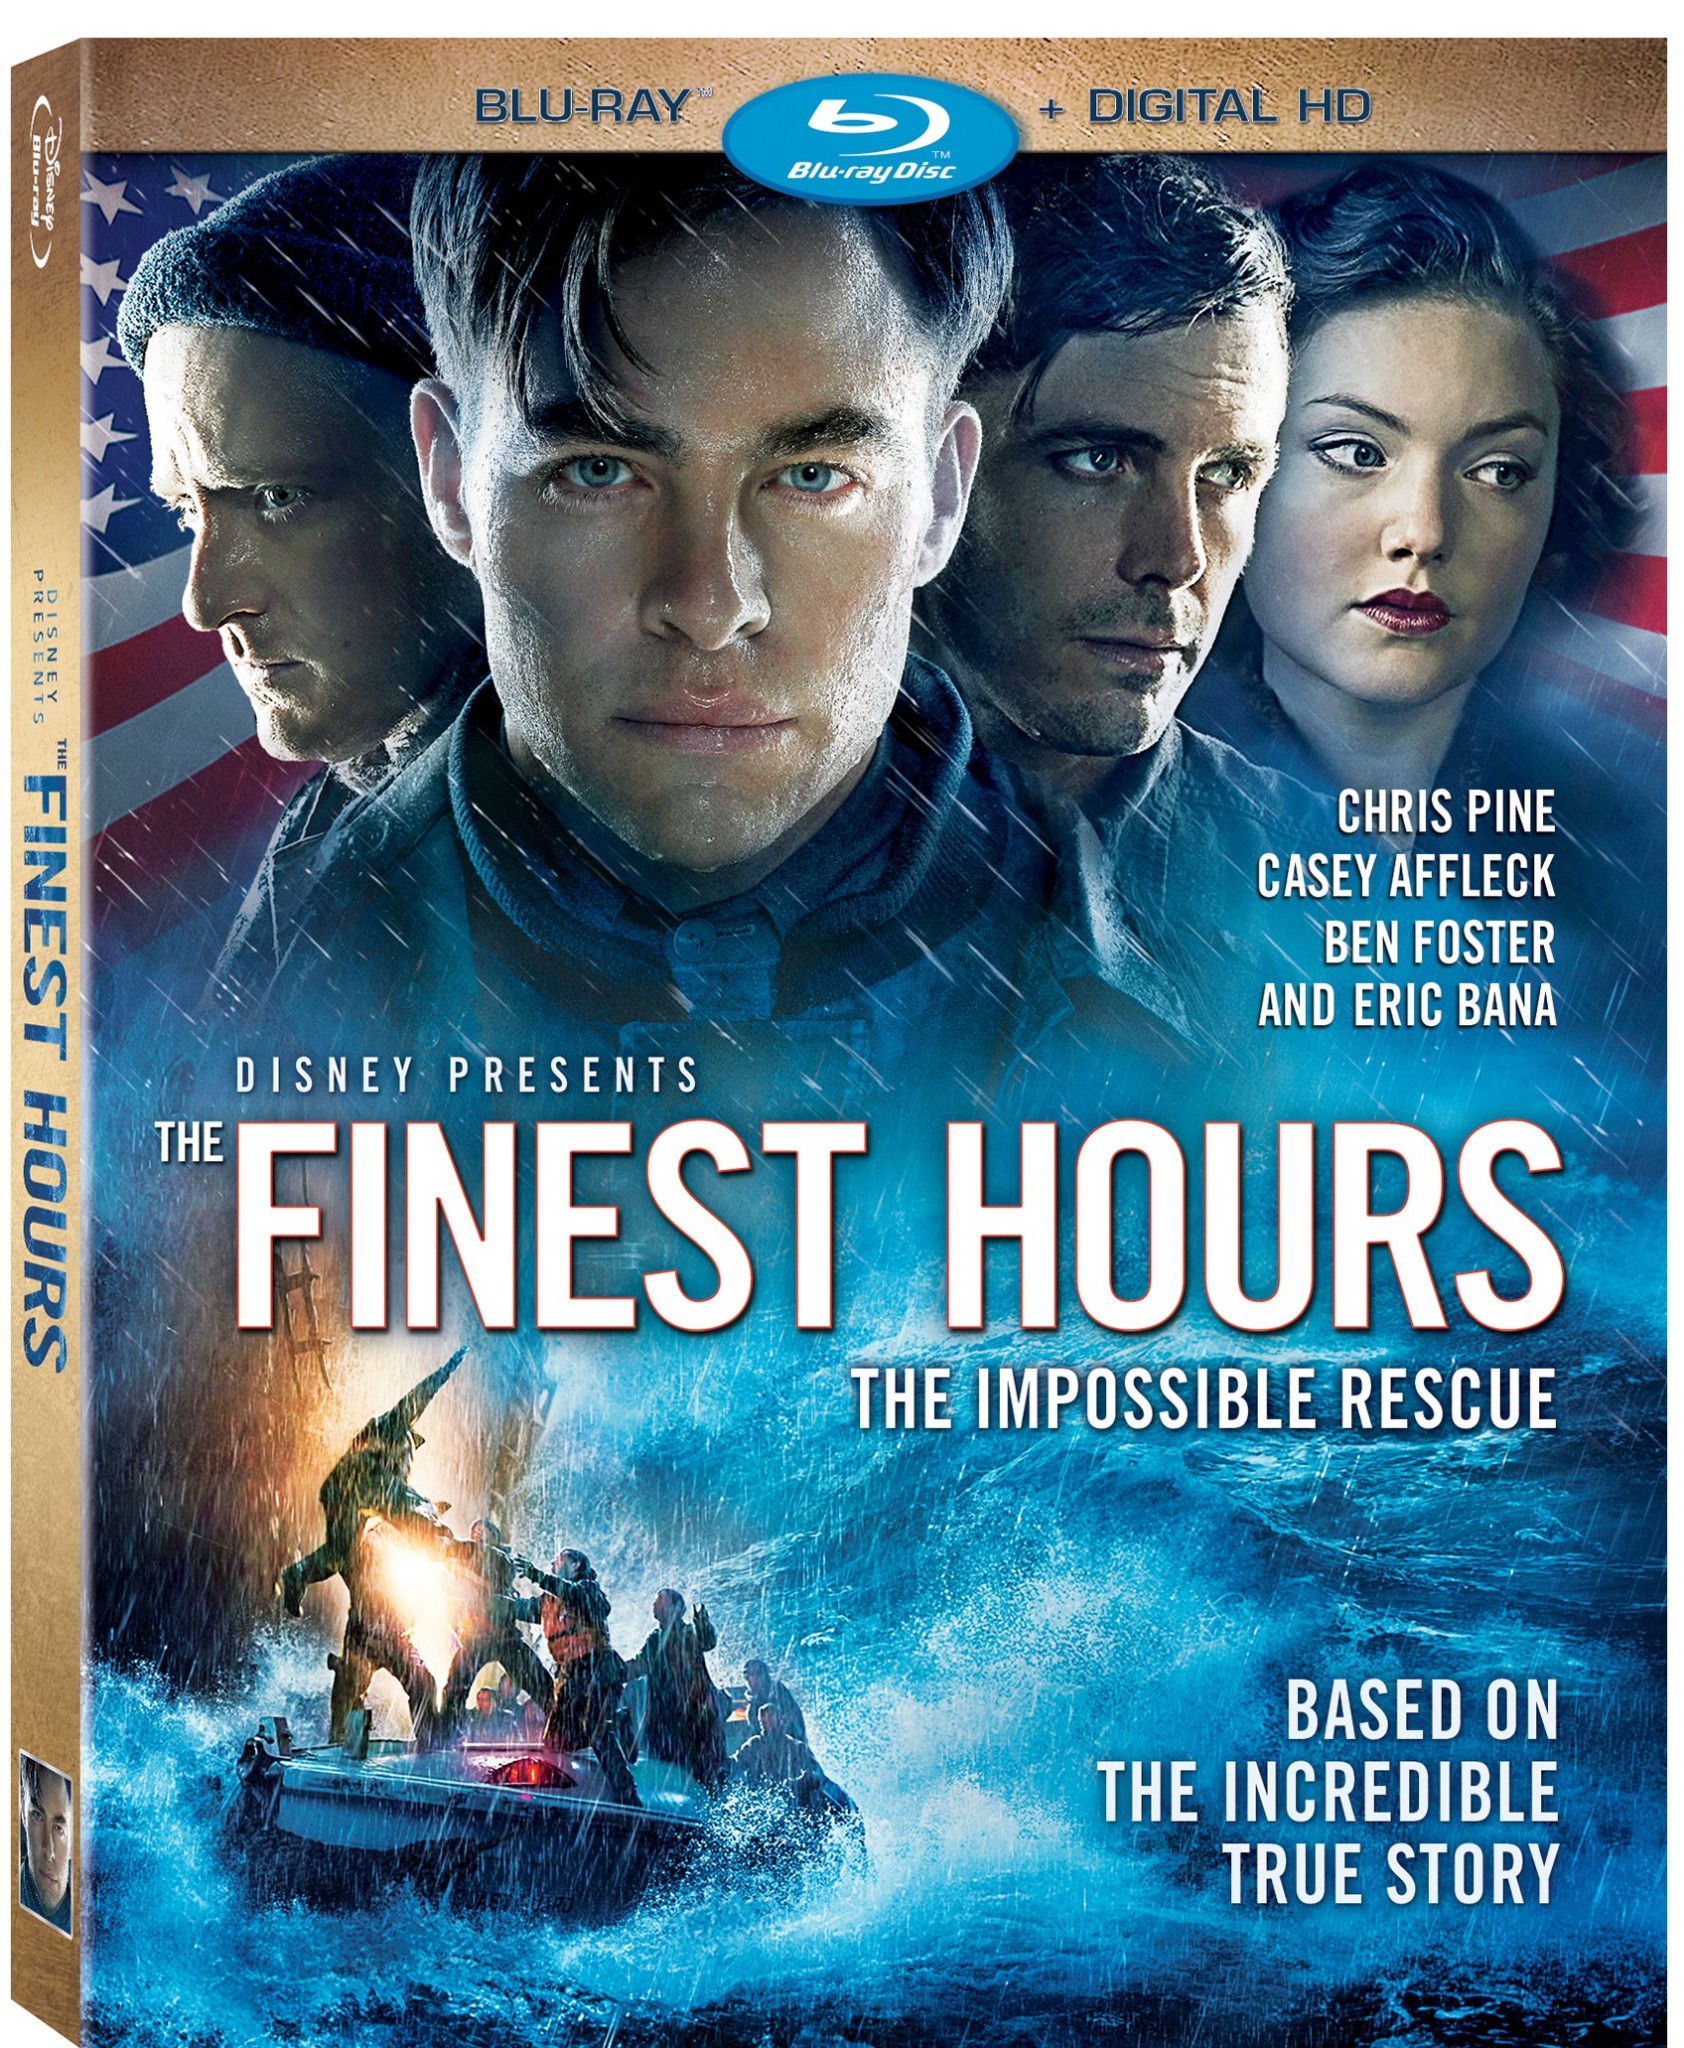 “The Finest Hours” Blu-Ray and Digital HD Release Date